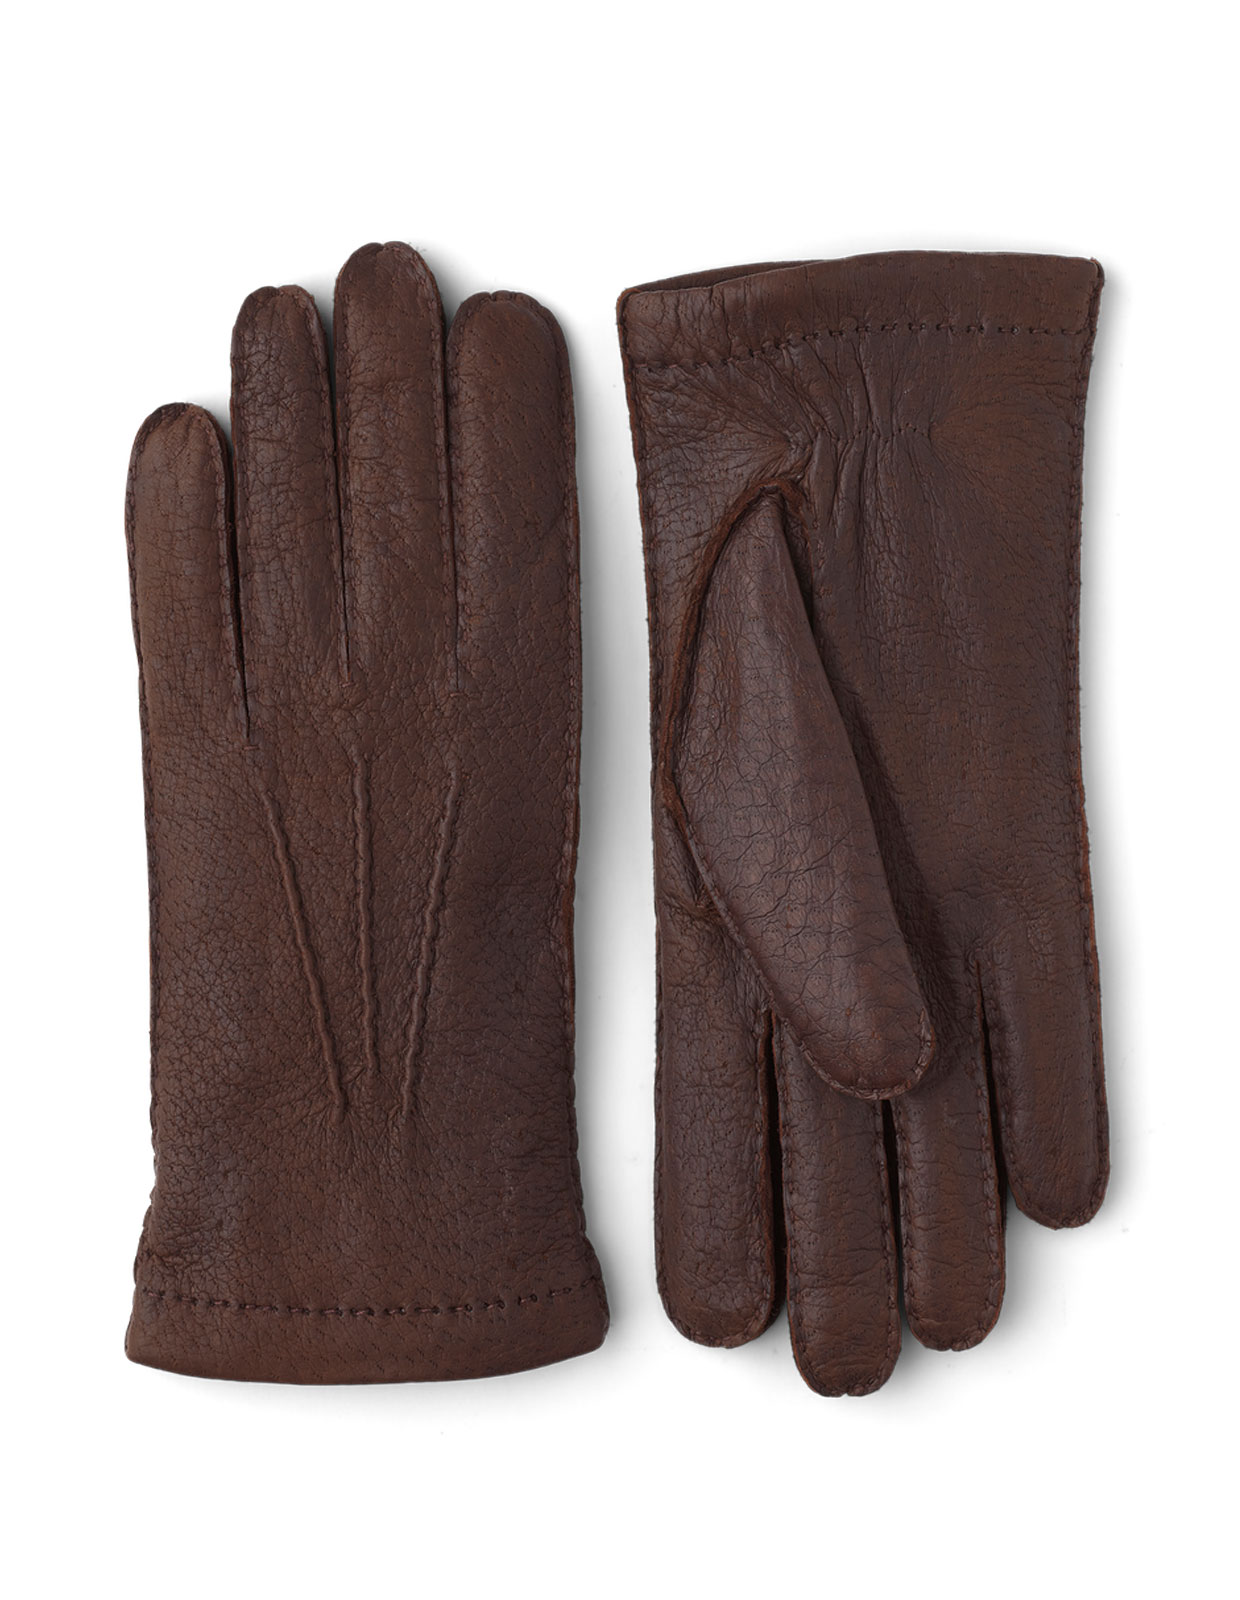 Peccary Handsewn Cashmere Lined Gloves Siena Stl 9.5